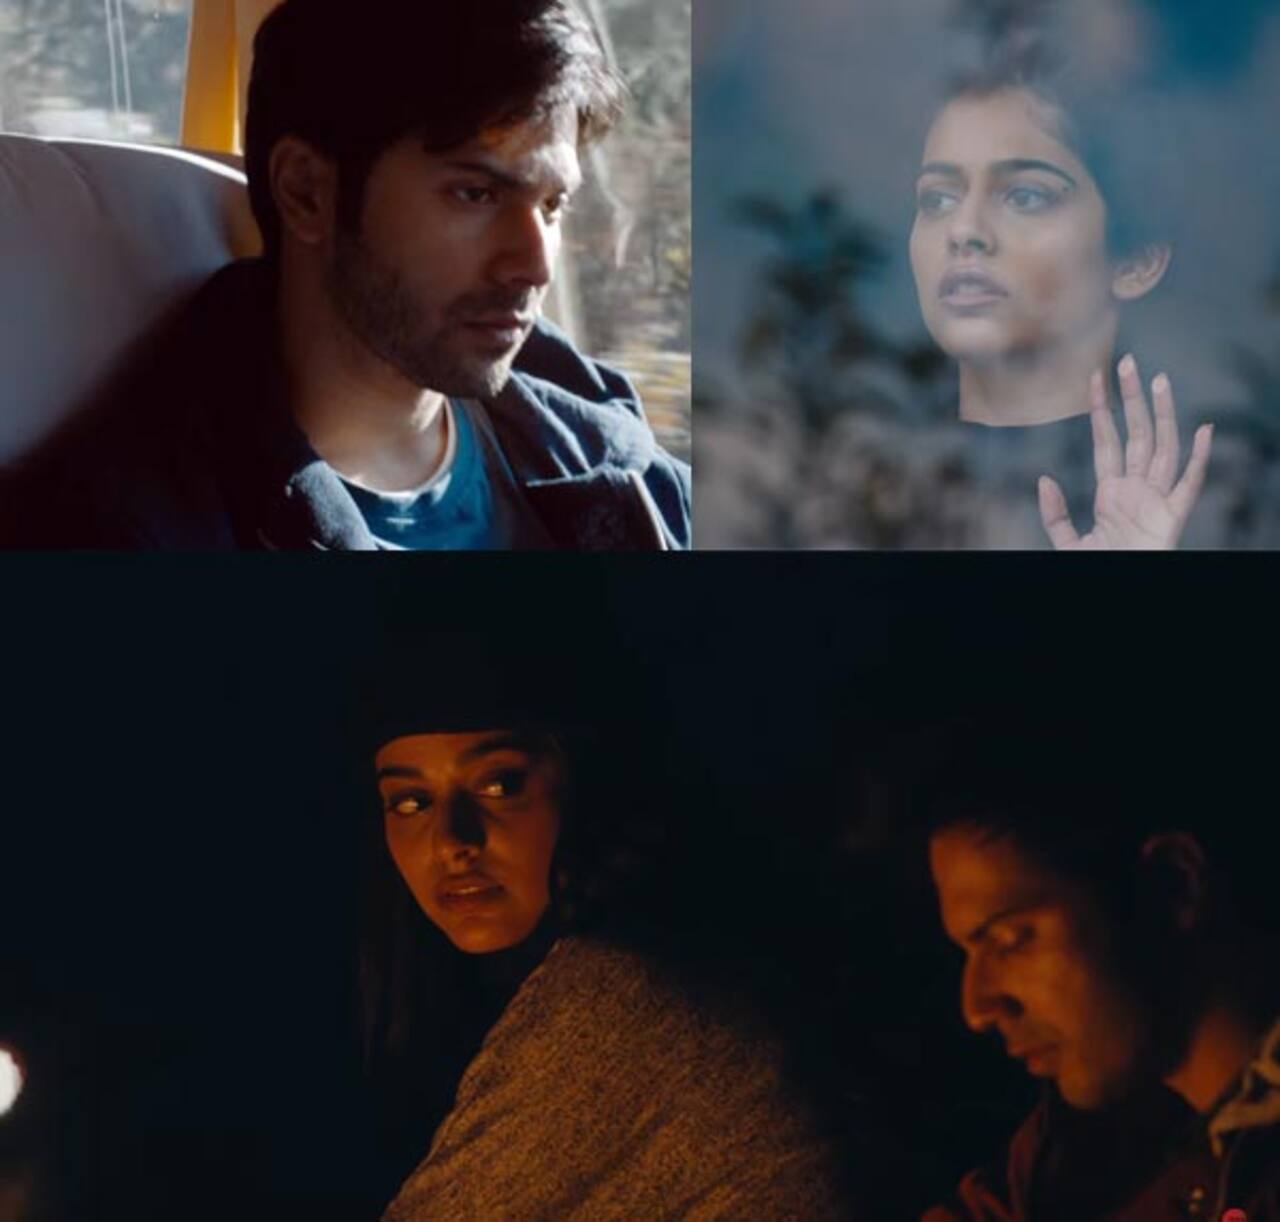 October song Tab bhi tu: Rahat Fateh Ali Khan's melancholic voice adds to Varun Dhawan's loneliness and it's heartbreaking